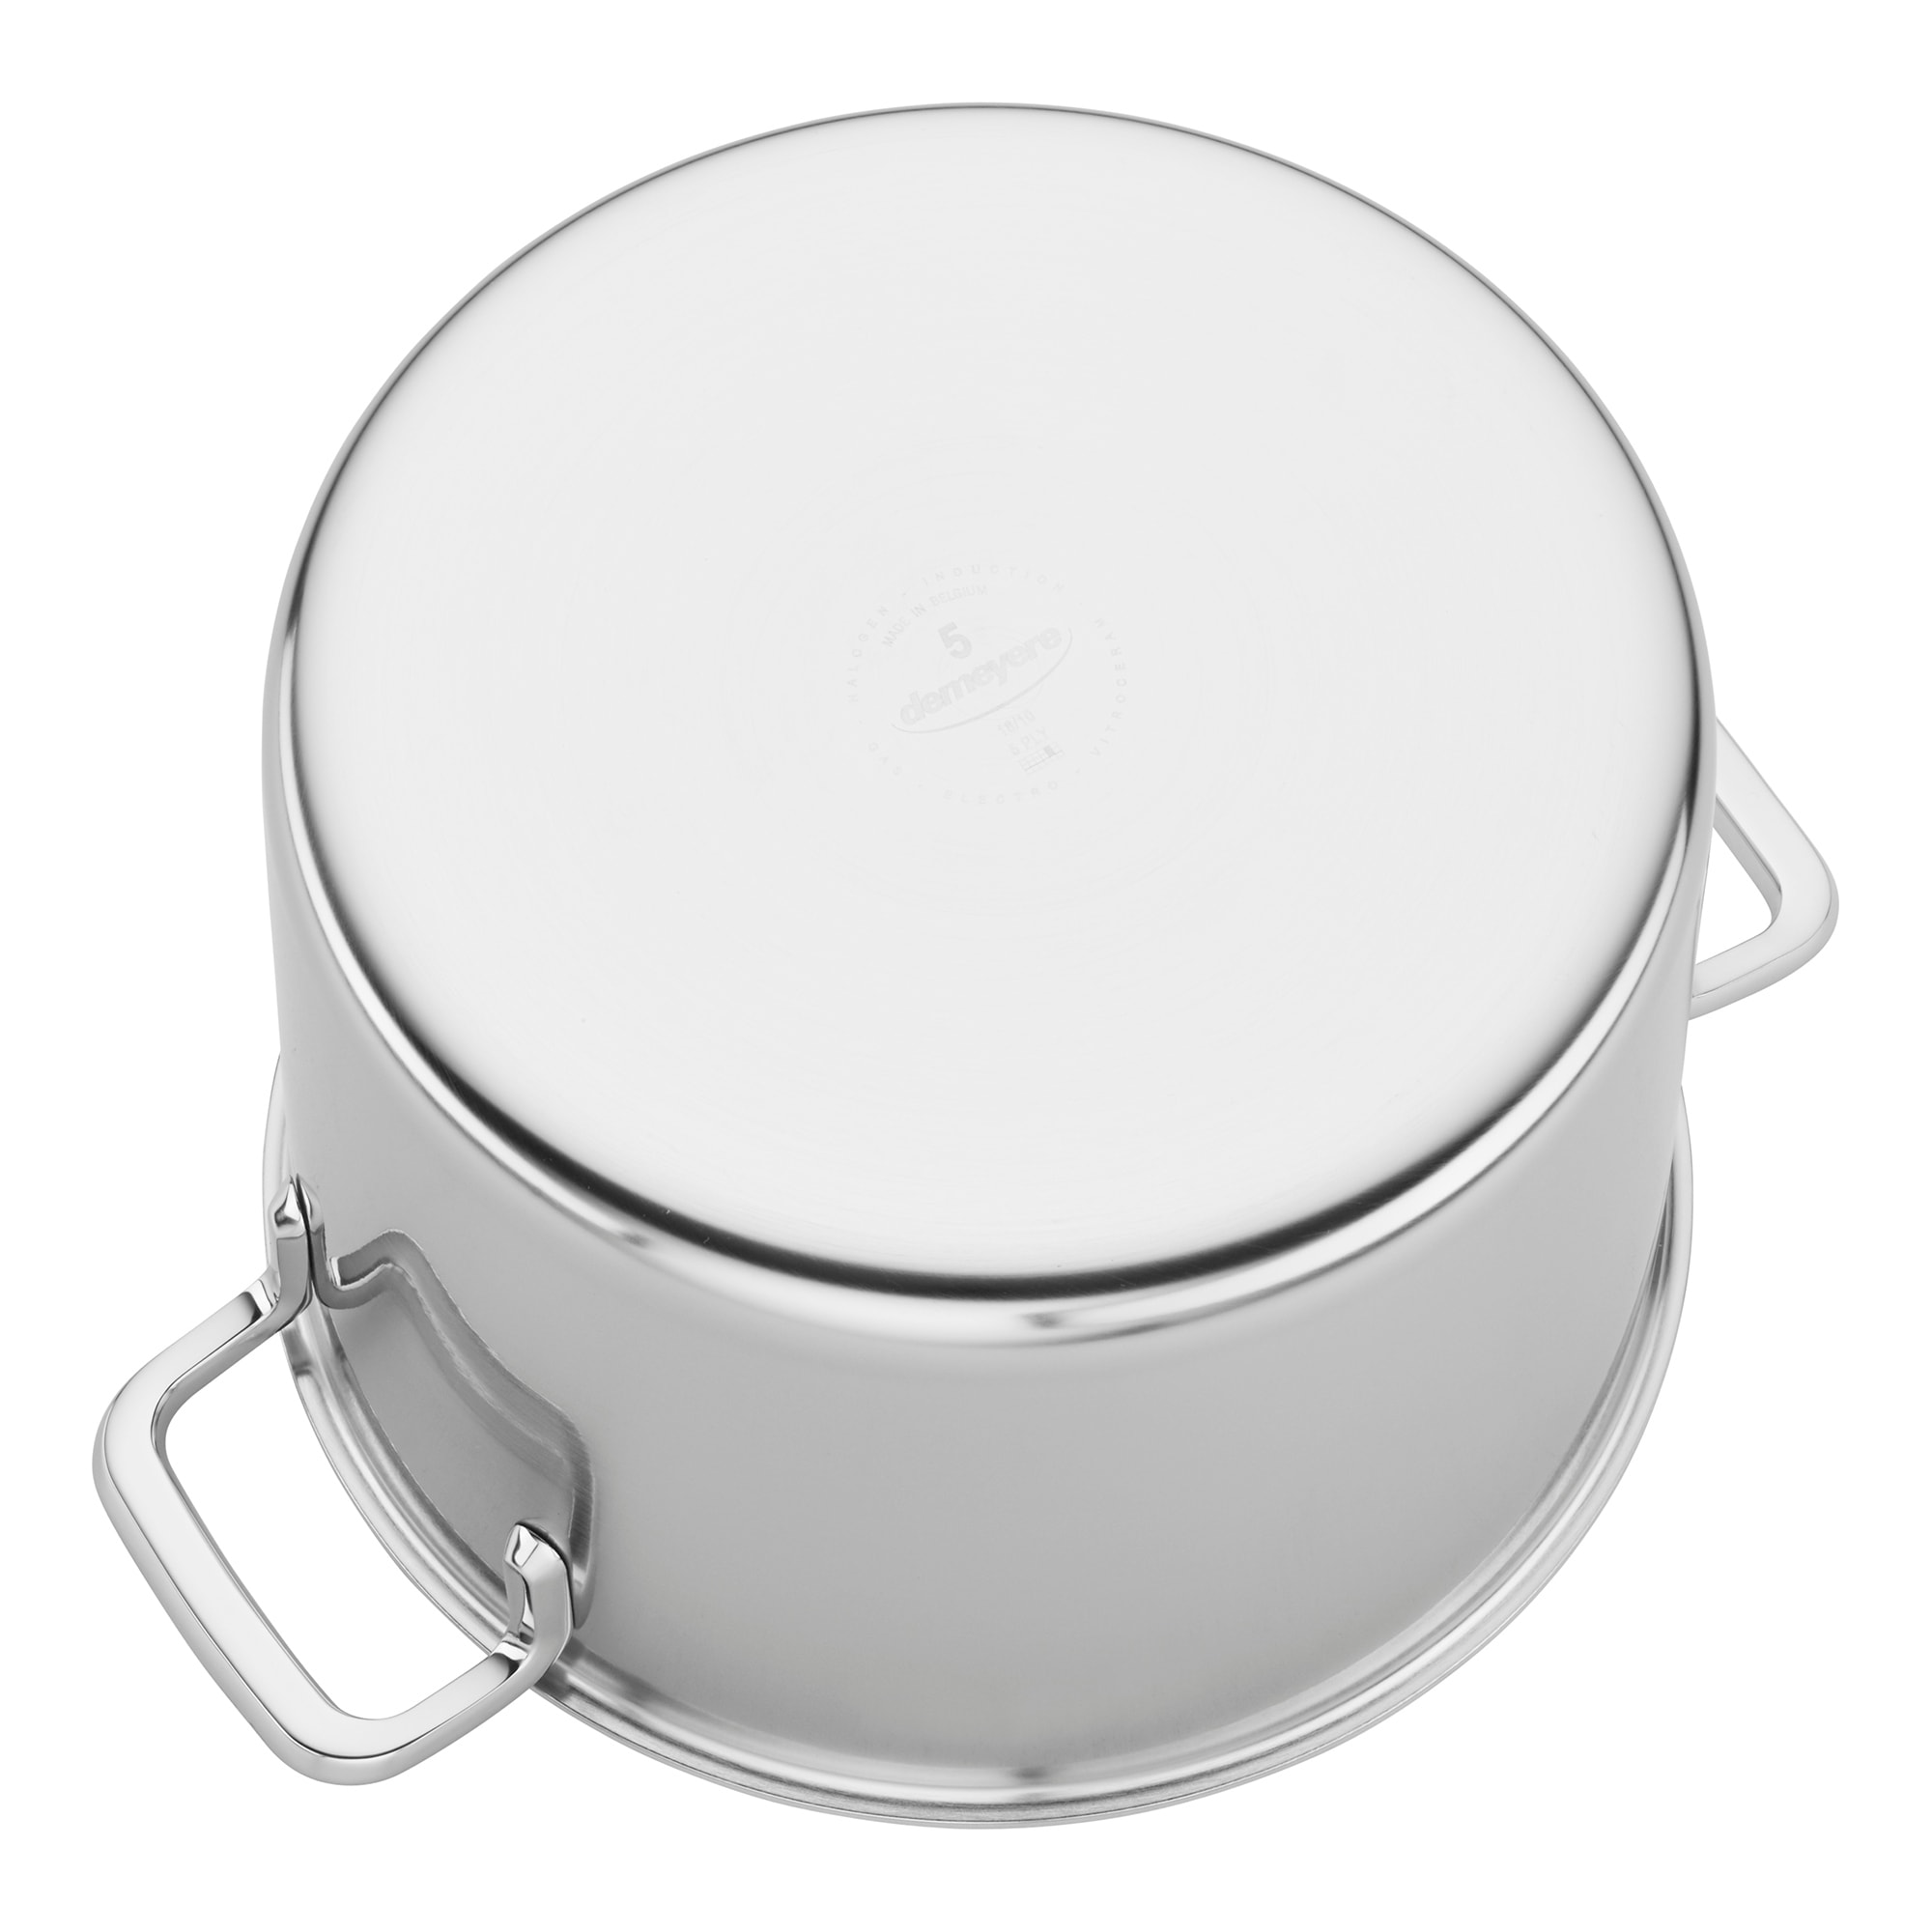 https://ak1.ostkcdn.com/images/products/is/images/direct/fd578f3d4c603088890b98a0377be601f76d7fc1/Demeyere-5-Plus-Stainless-Steel-8-qt-Stock-Pot.jpg